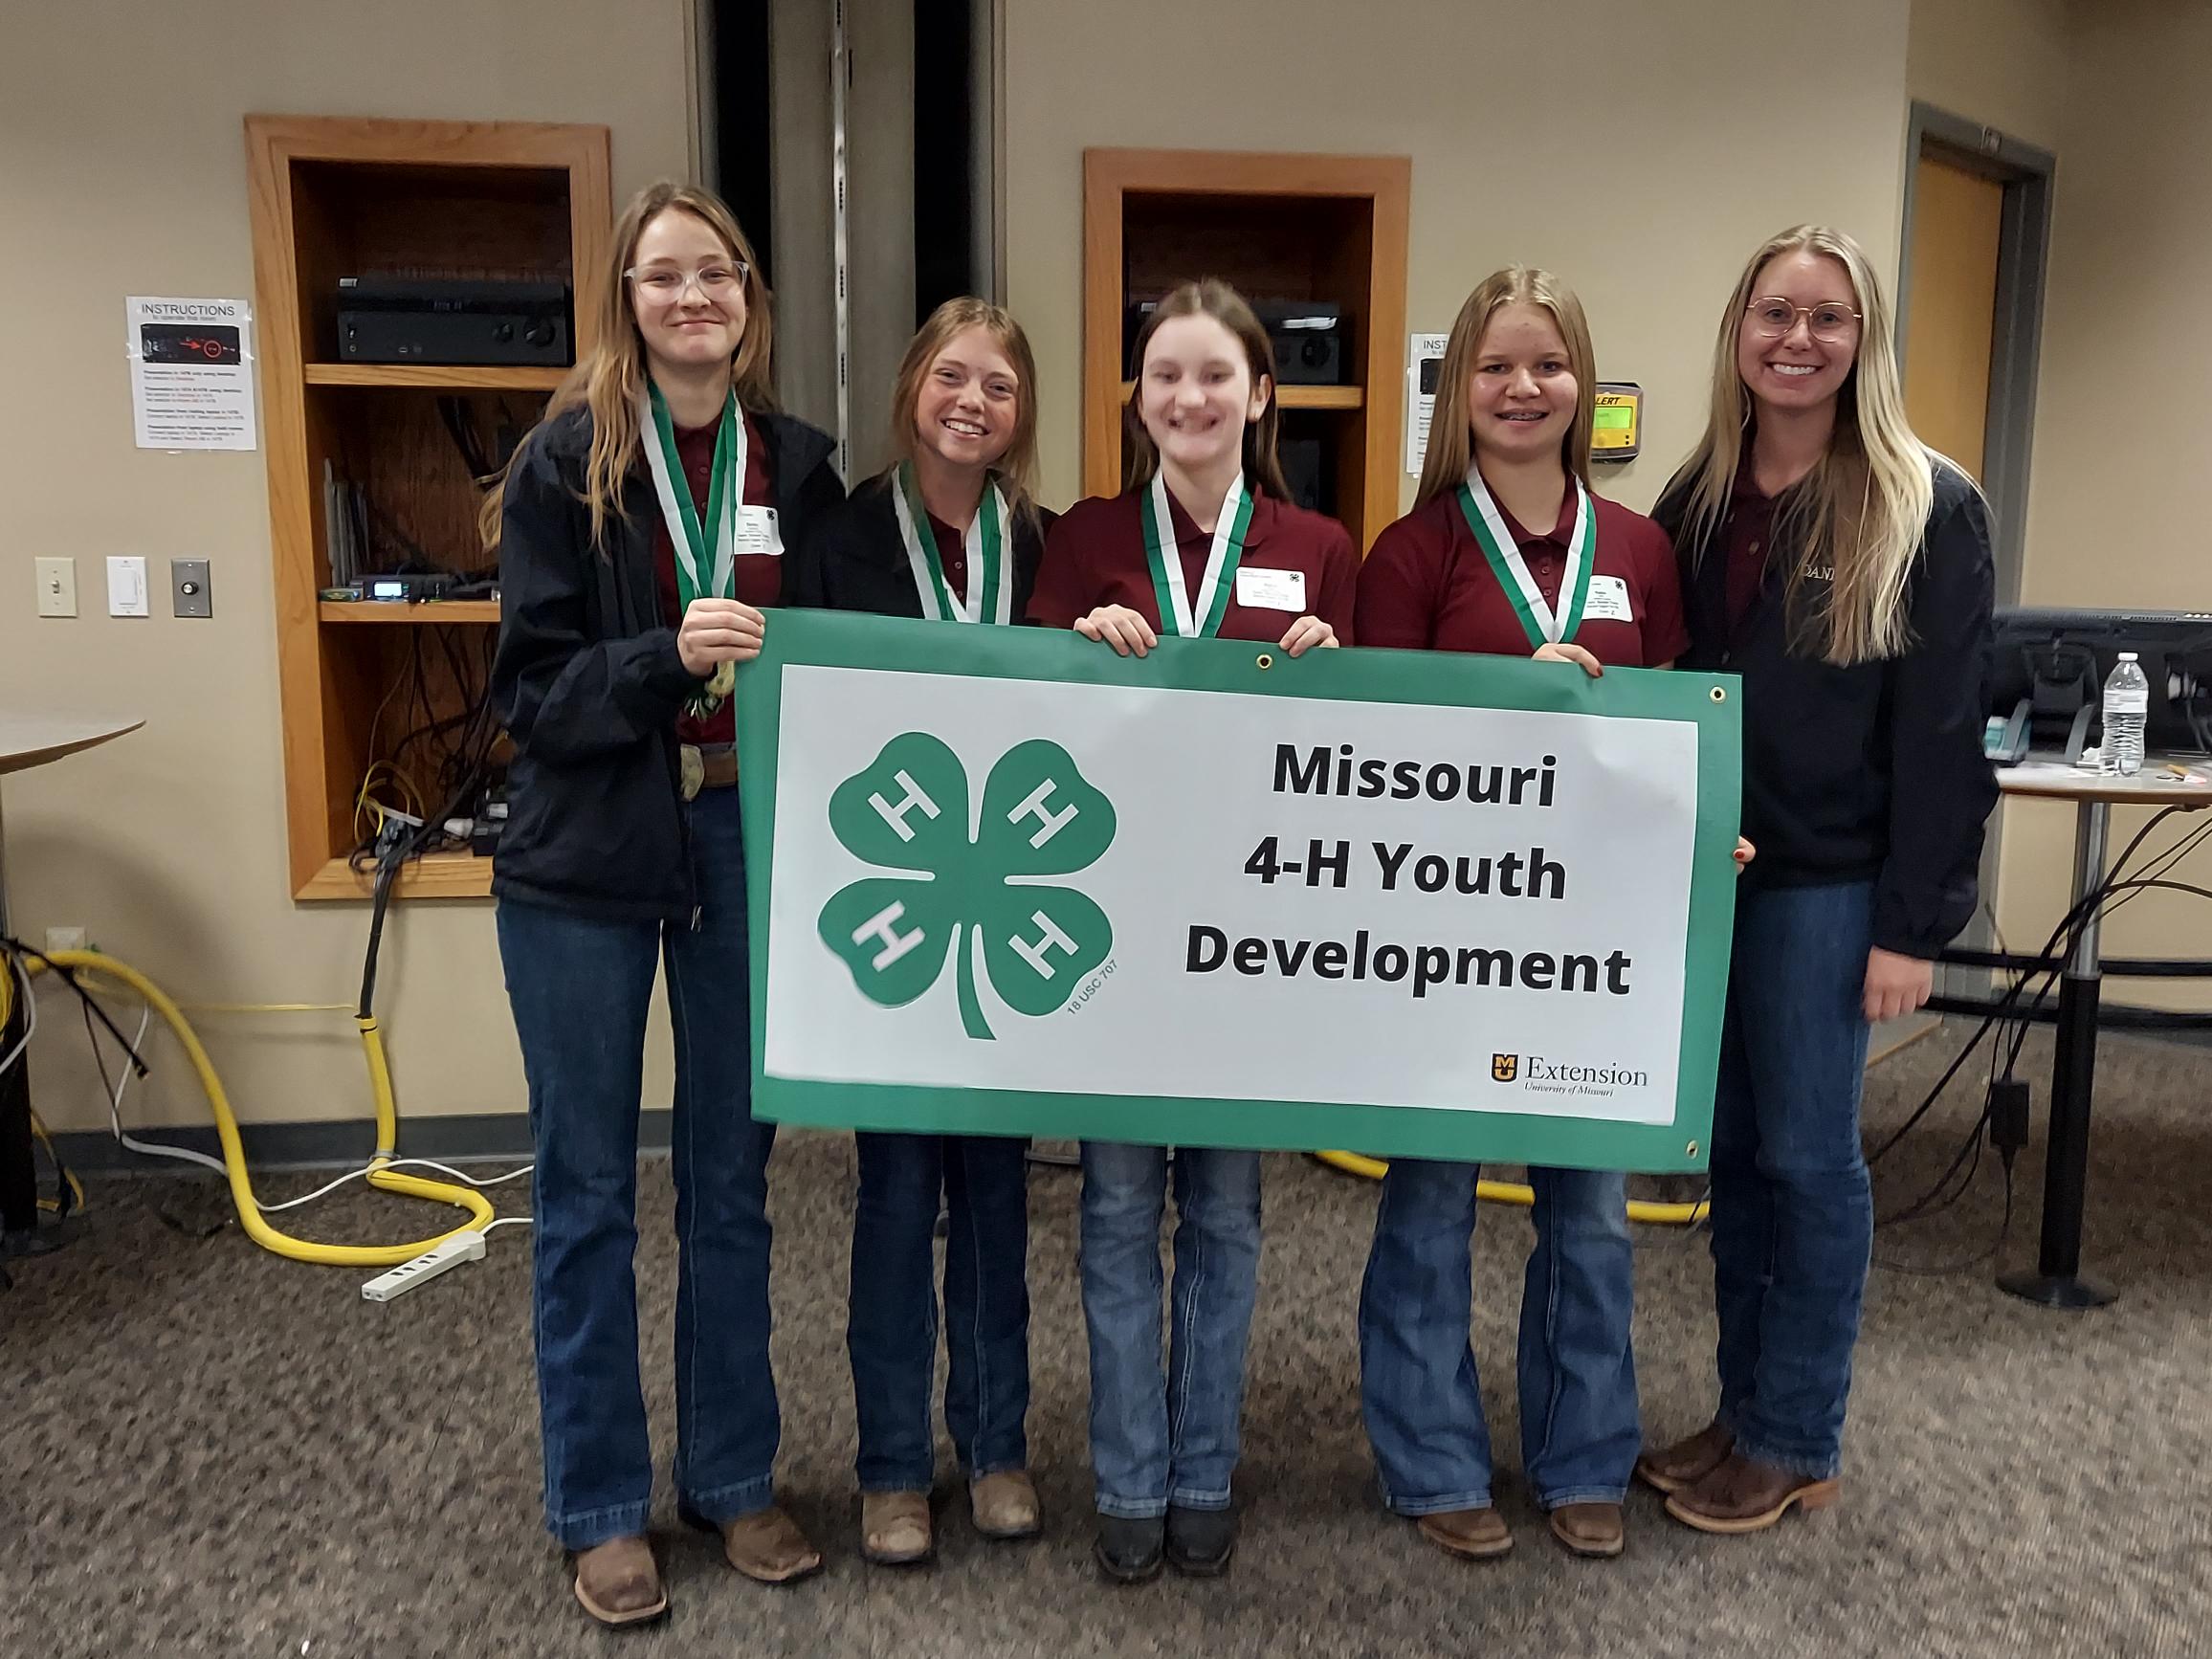 State 4-H Horse Bowl Contest top senior team (ages 14-18), representing Jackson County. From left, Bailey Spalding, Elizabeth Pruett, Alaina O'Dell, Kelsa Kirk and Dani Picard (coach).